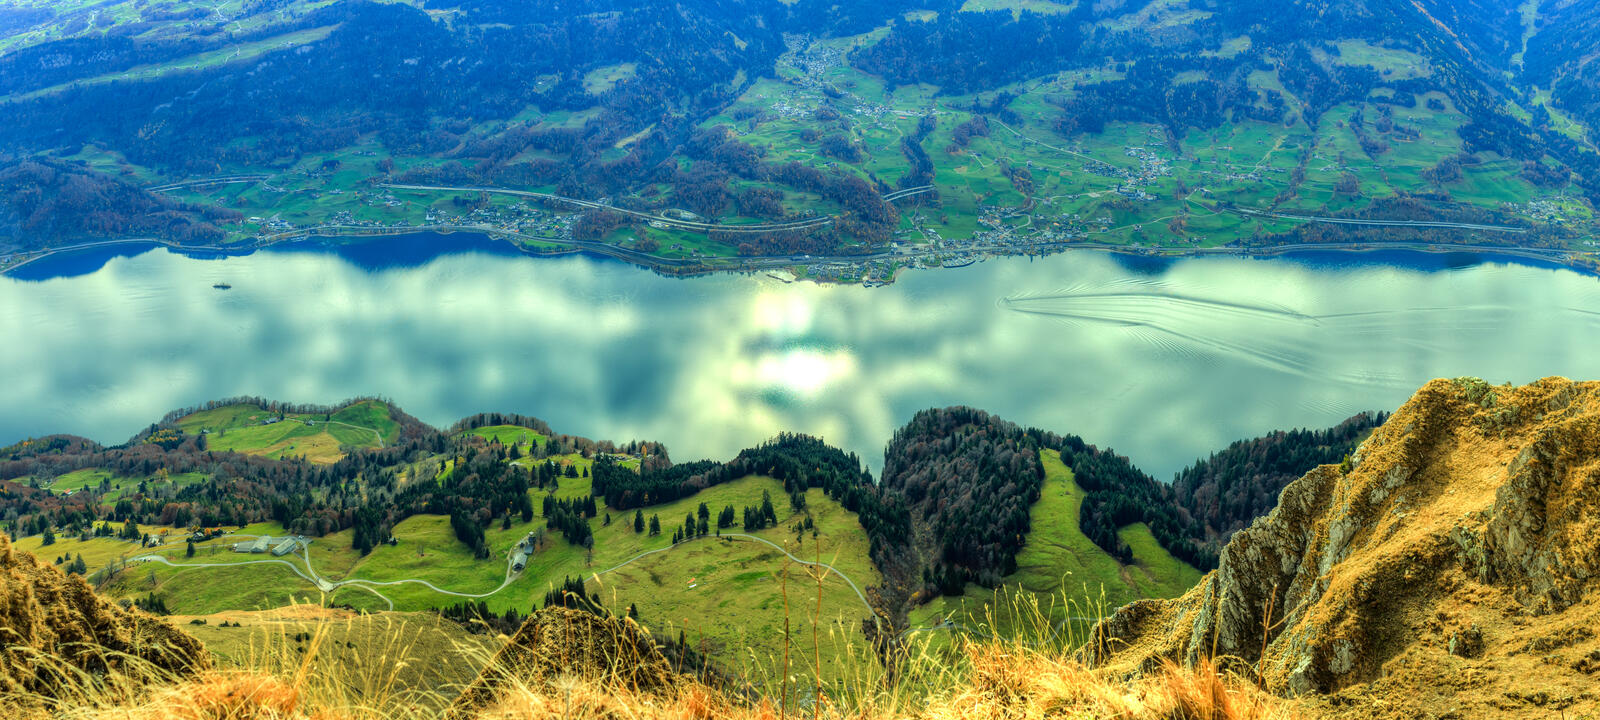 Wallpapers Walensee lake Swiss Alps on the desktop